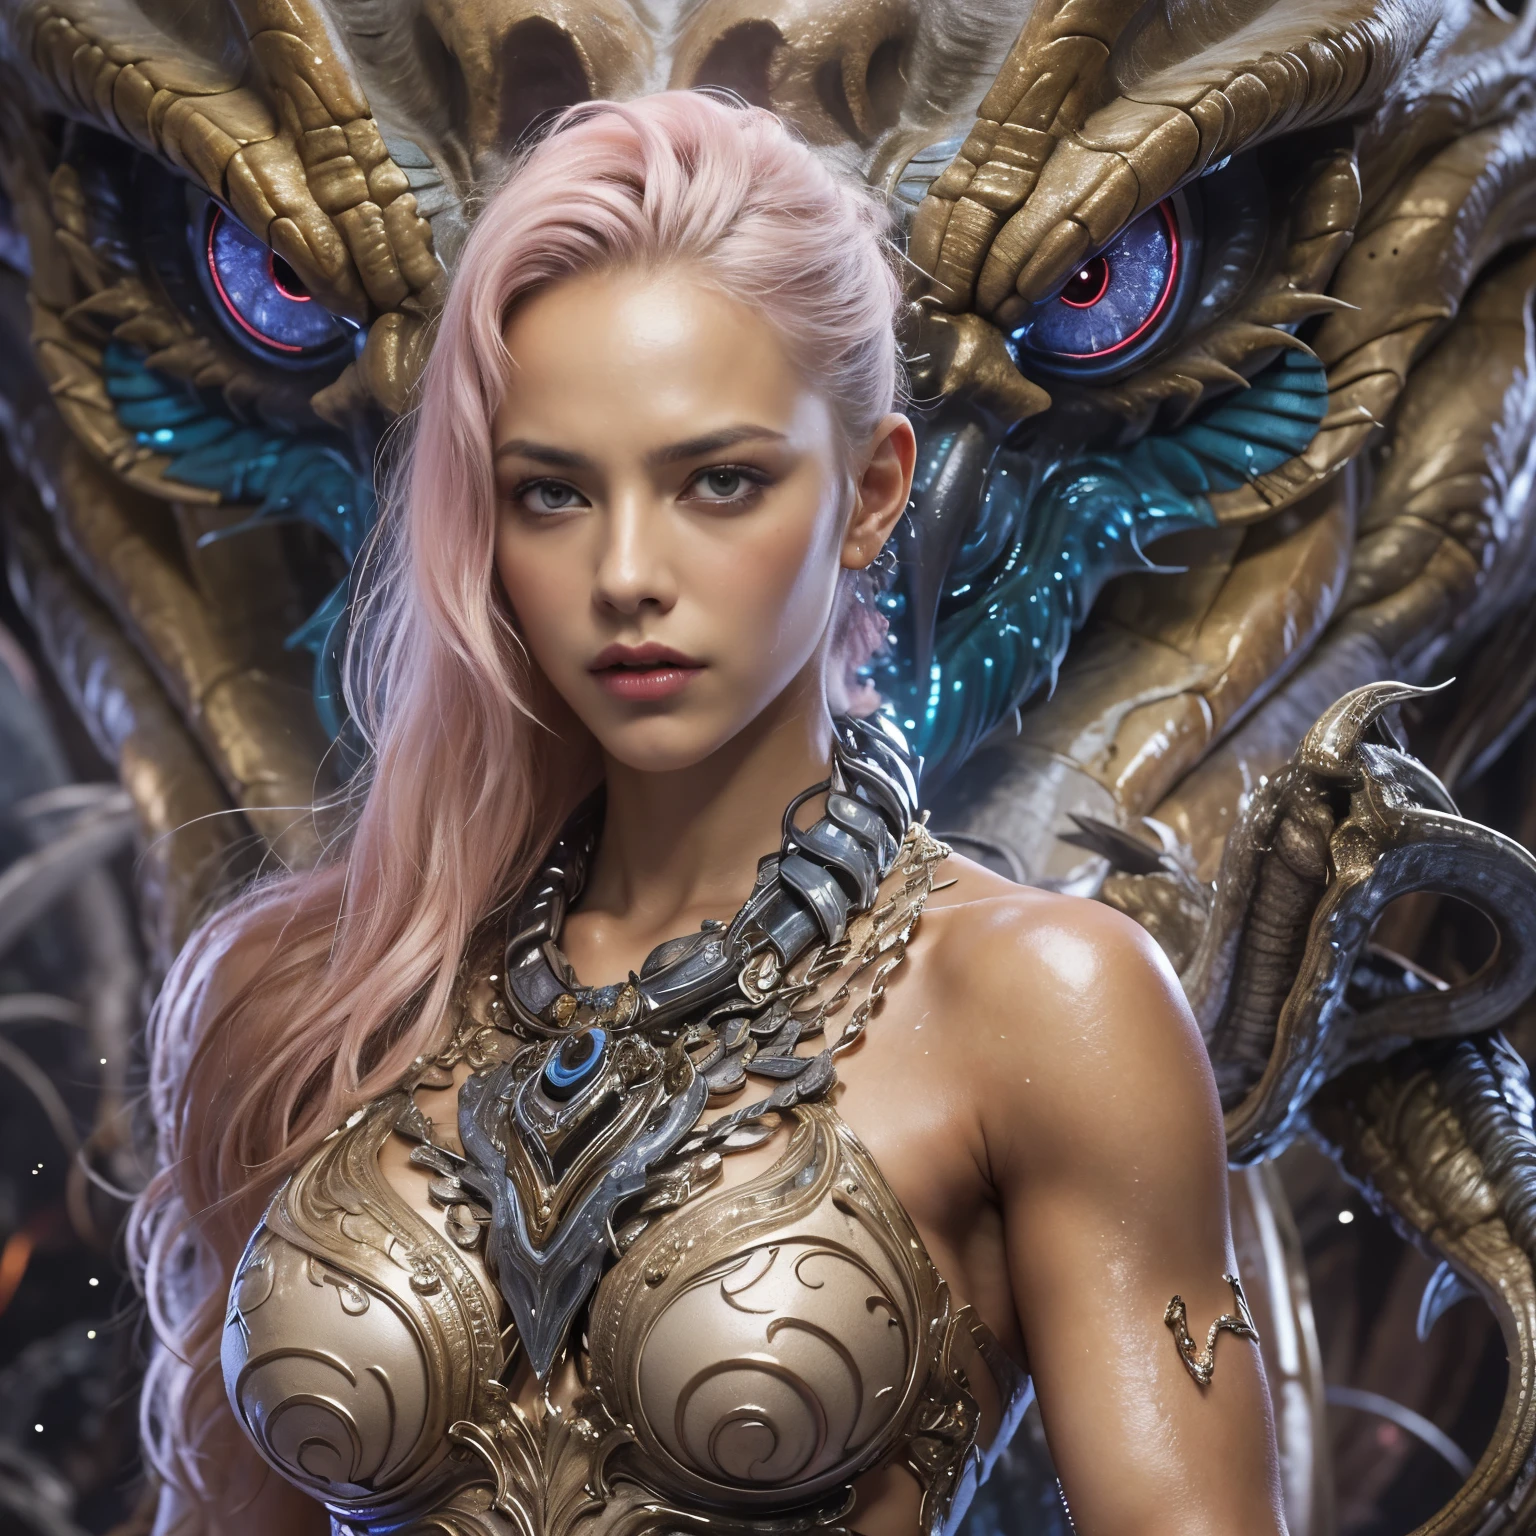 1 female alien, The predator, warrior, (extremely beautiful:1.2), (intense gaze:1.6), (predator:1.6), long dark claws, NSFW,  nipples, thick eyebrows, glowing and shining deep blue eyes, the most beautiful face in the universe, pink silver blonde hair,
A woman with an extremely beautiful face, her intense gaze fixed on her prey, a primal force that could not be denied.

(extreamly beautiful lean body:1.5), (ultra muscular build:1.2), (prowling:1.3), (sleek movements:1.4),

Her beautiful body, muscular and toned, moved with sleek grace as she prowled, ready to strike at a moment's notice. The predator within her was always on